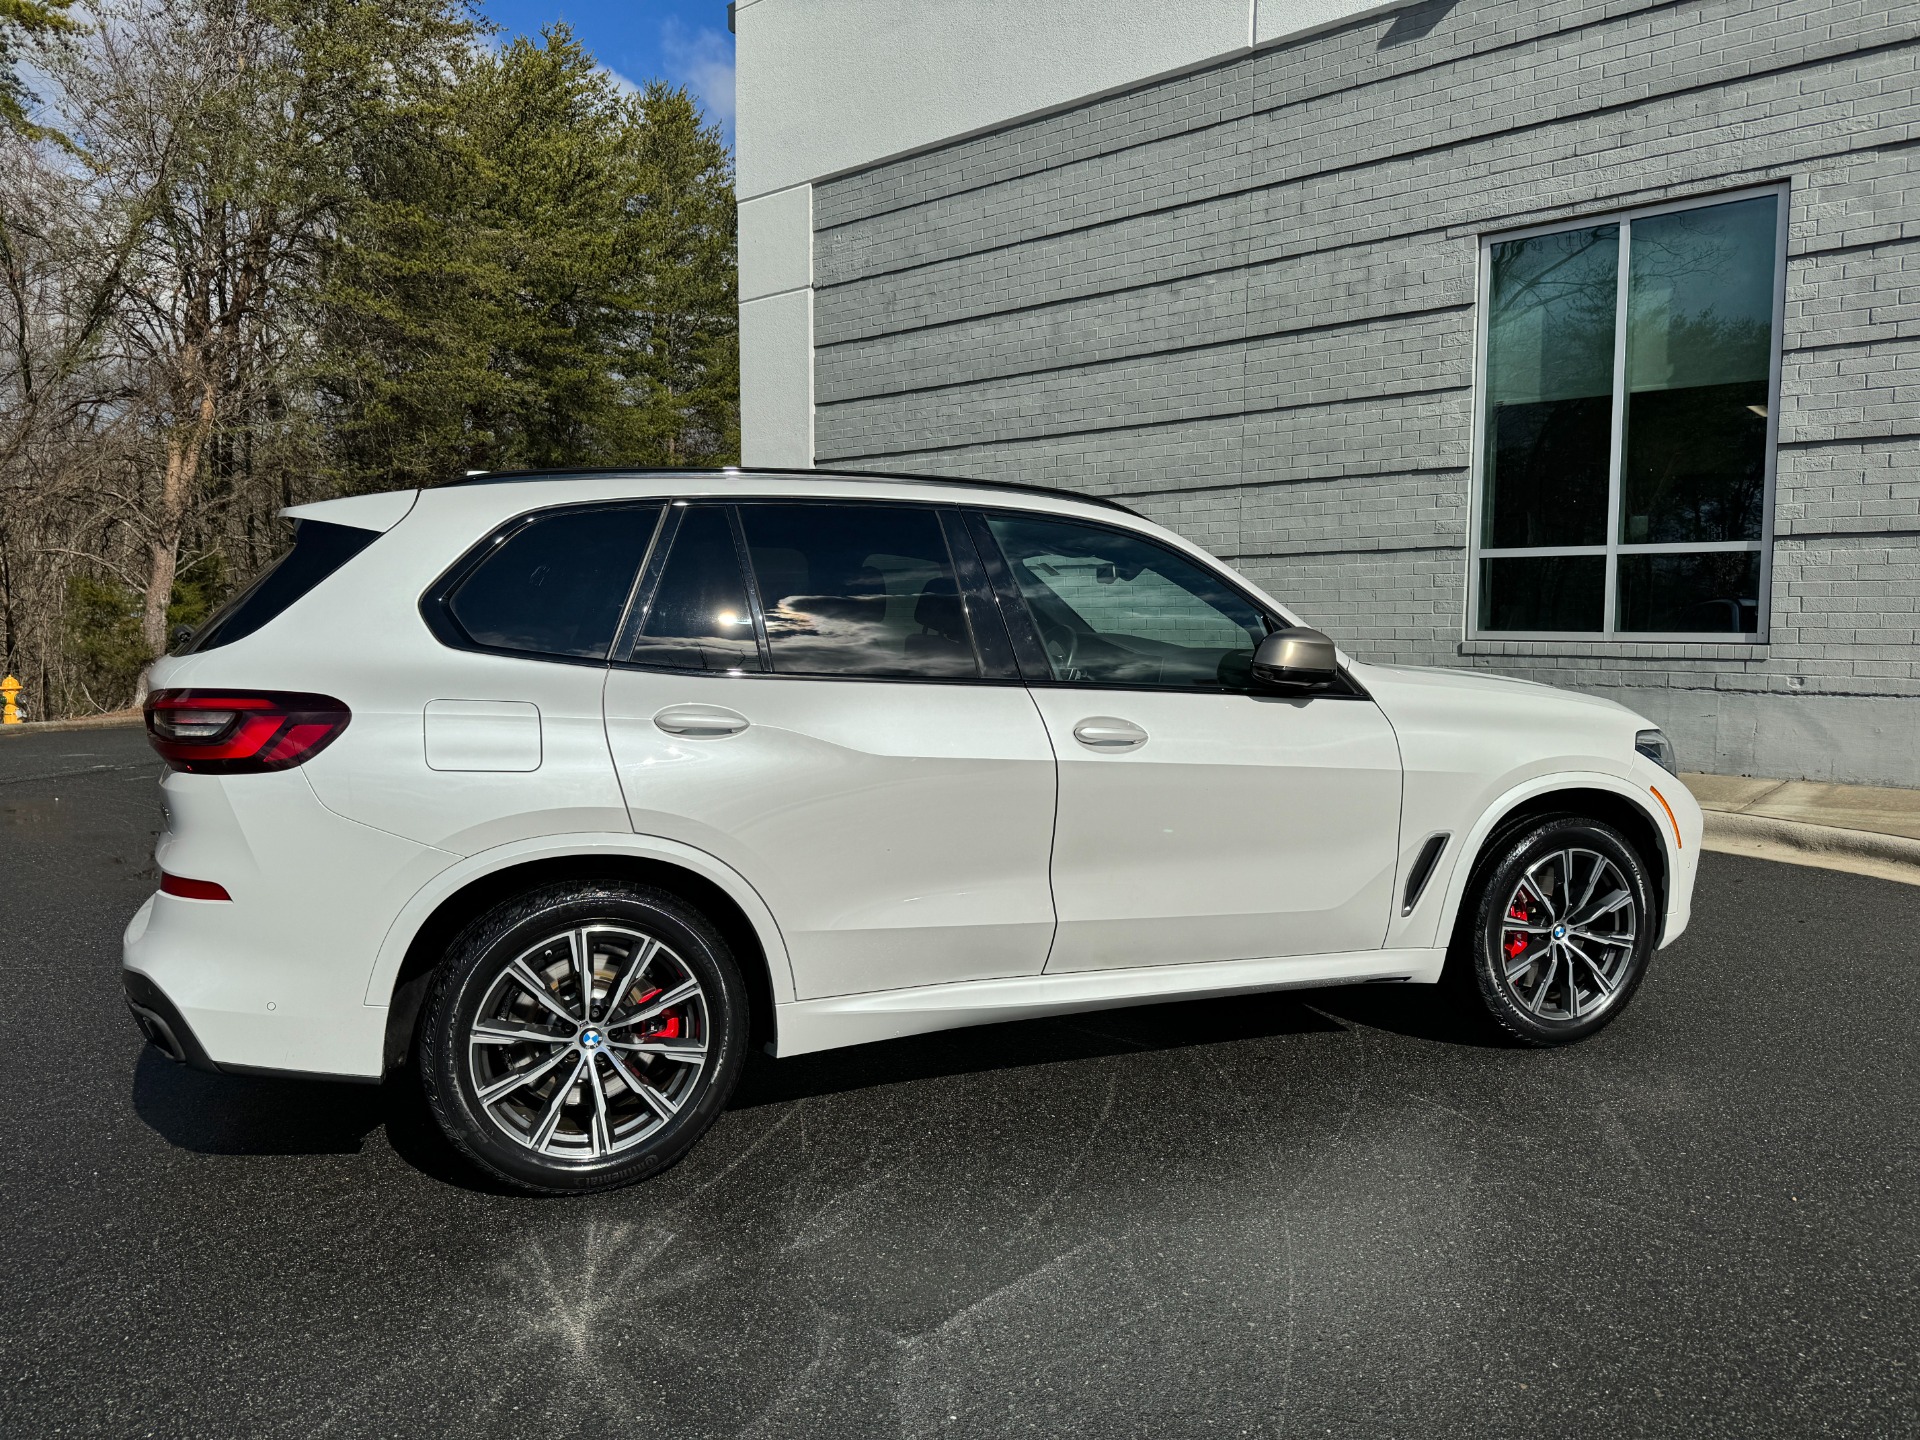 Used 2021 BMW X5 M50i AIR SUSPENSION / COGNAC LEATHER for sale $55,000 at Formula Imports in Charlotte NC 28227 8